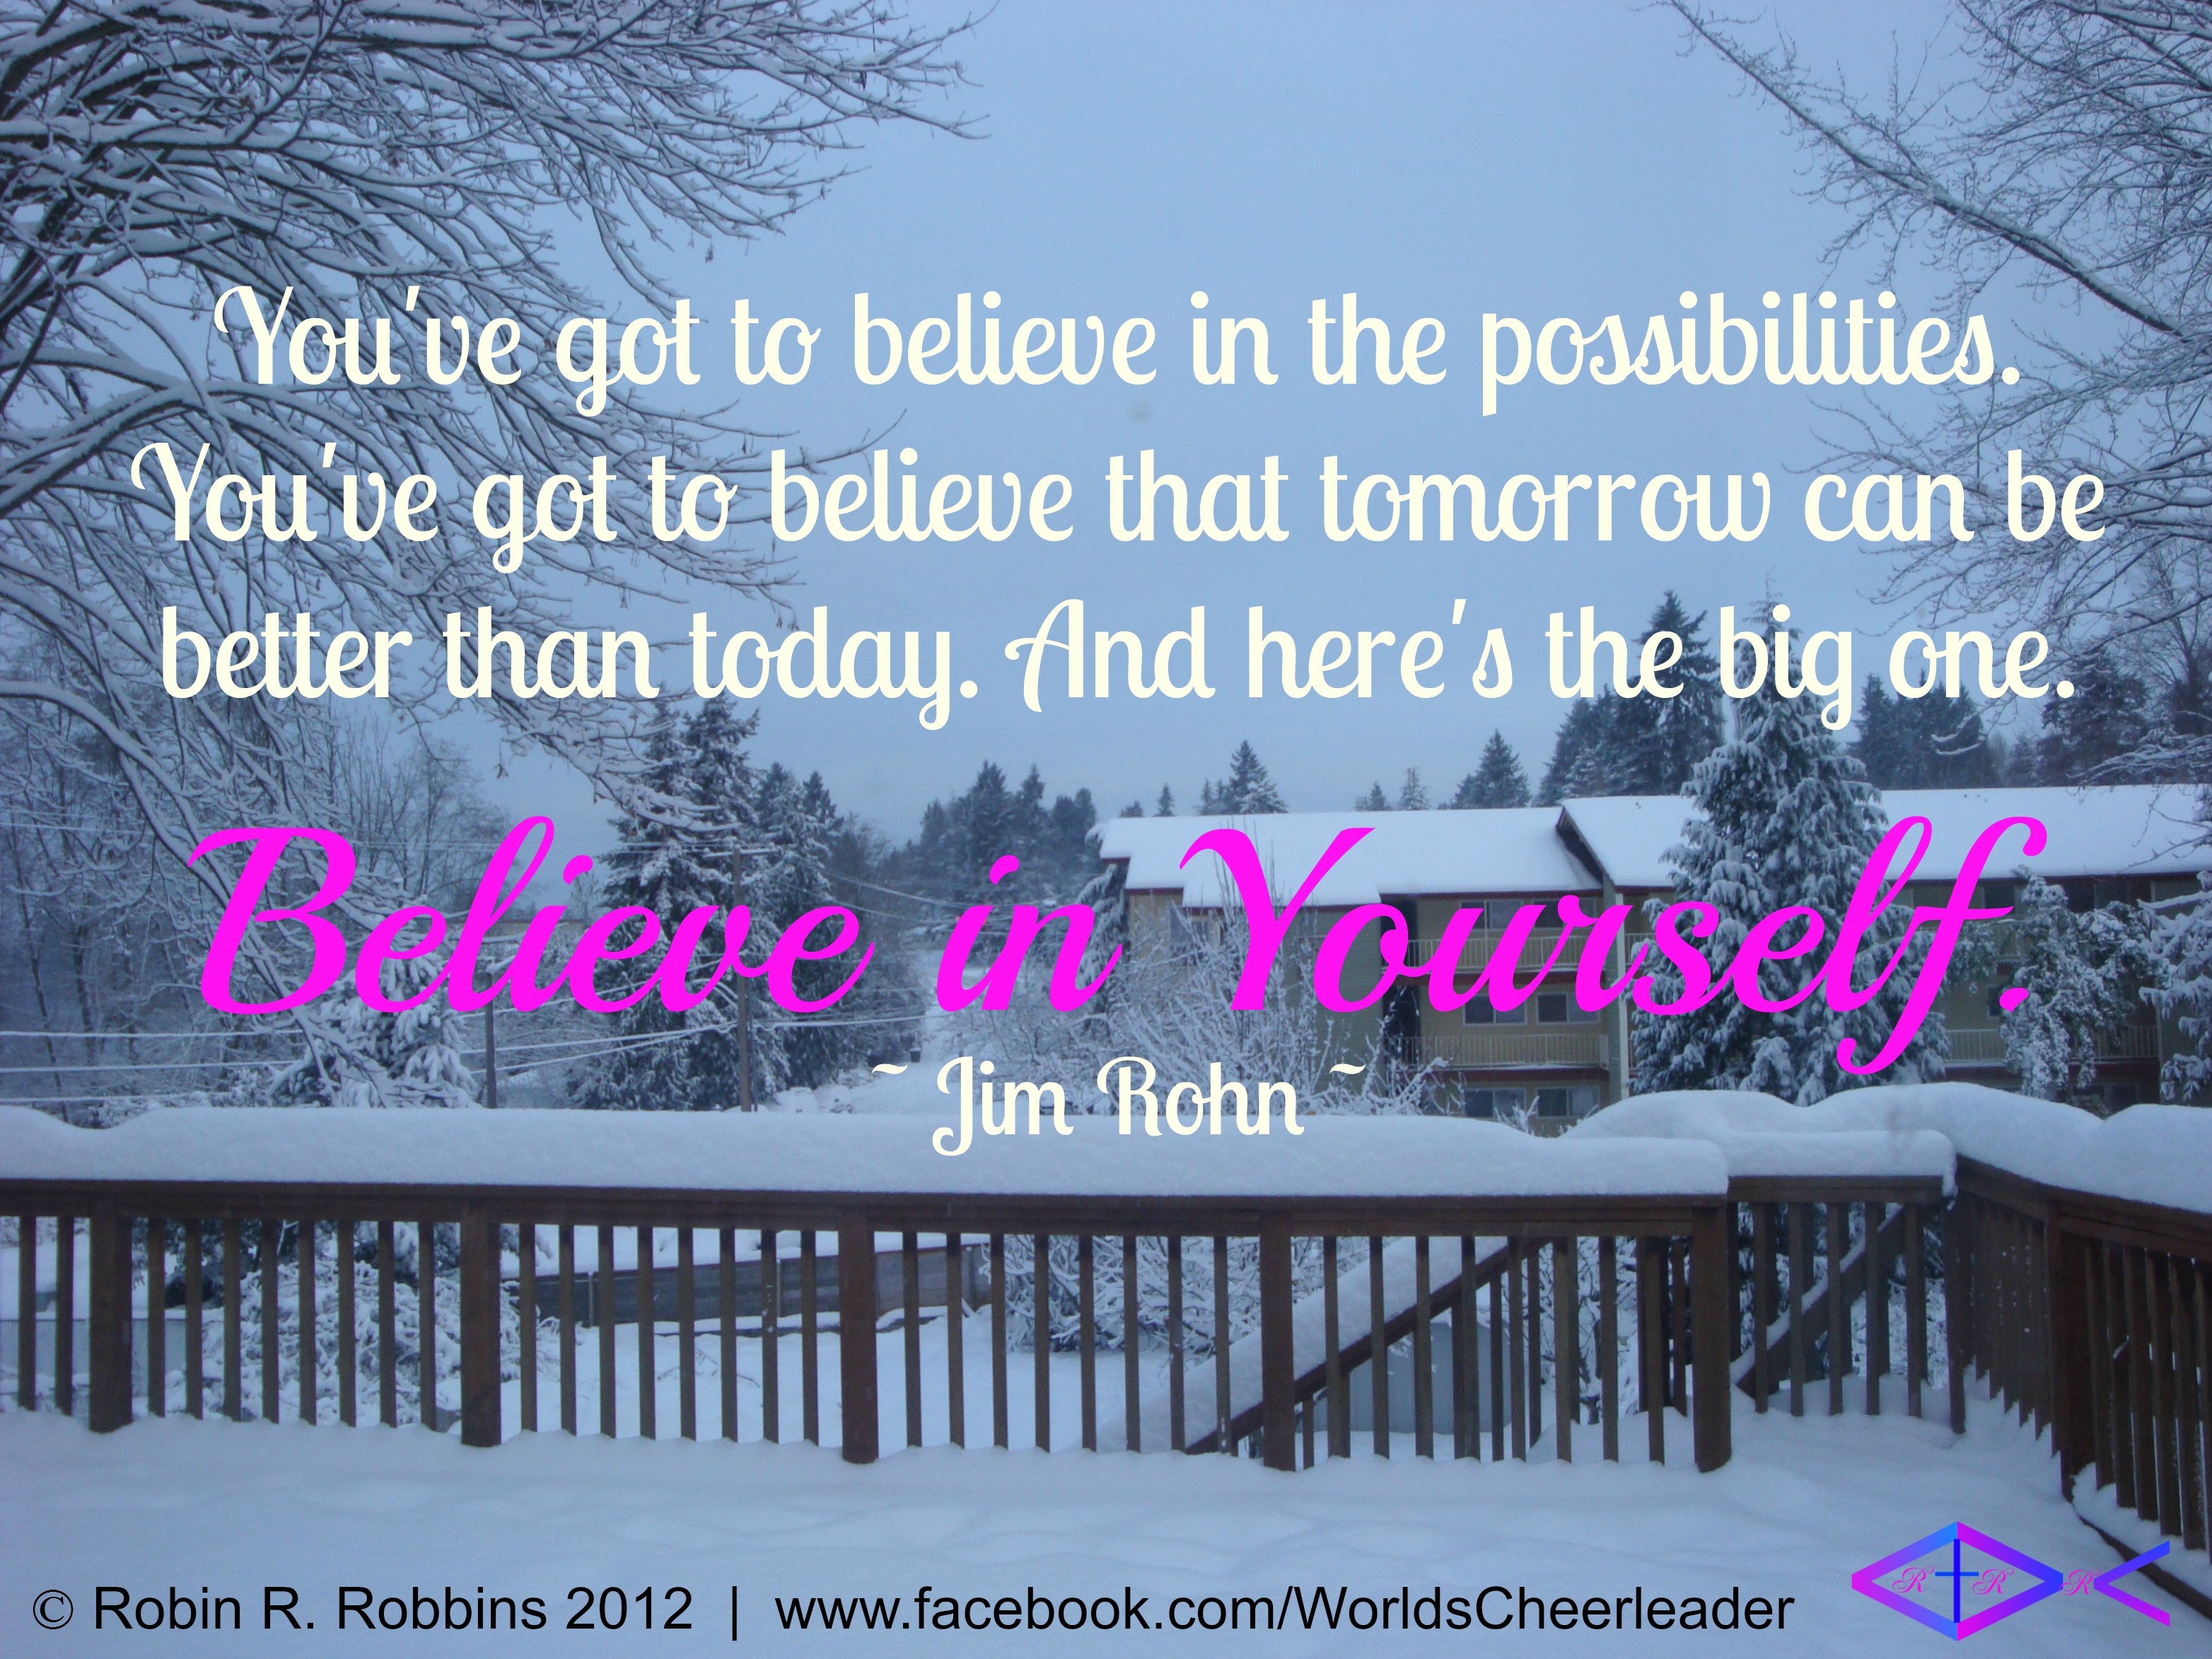 You've got to believe in the possibilities. You've got to believe that tomorrow can be better than today. And here's the big one. Believe in yourself. Jim Rohn